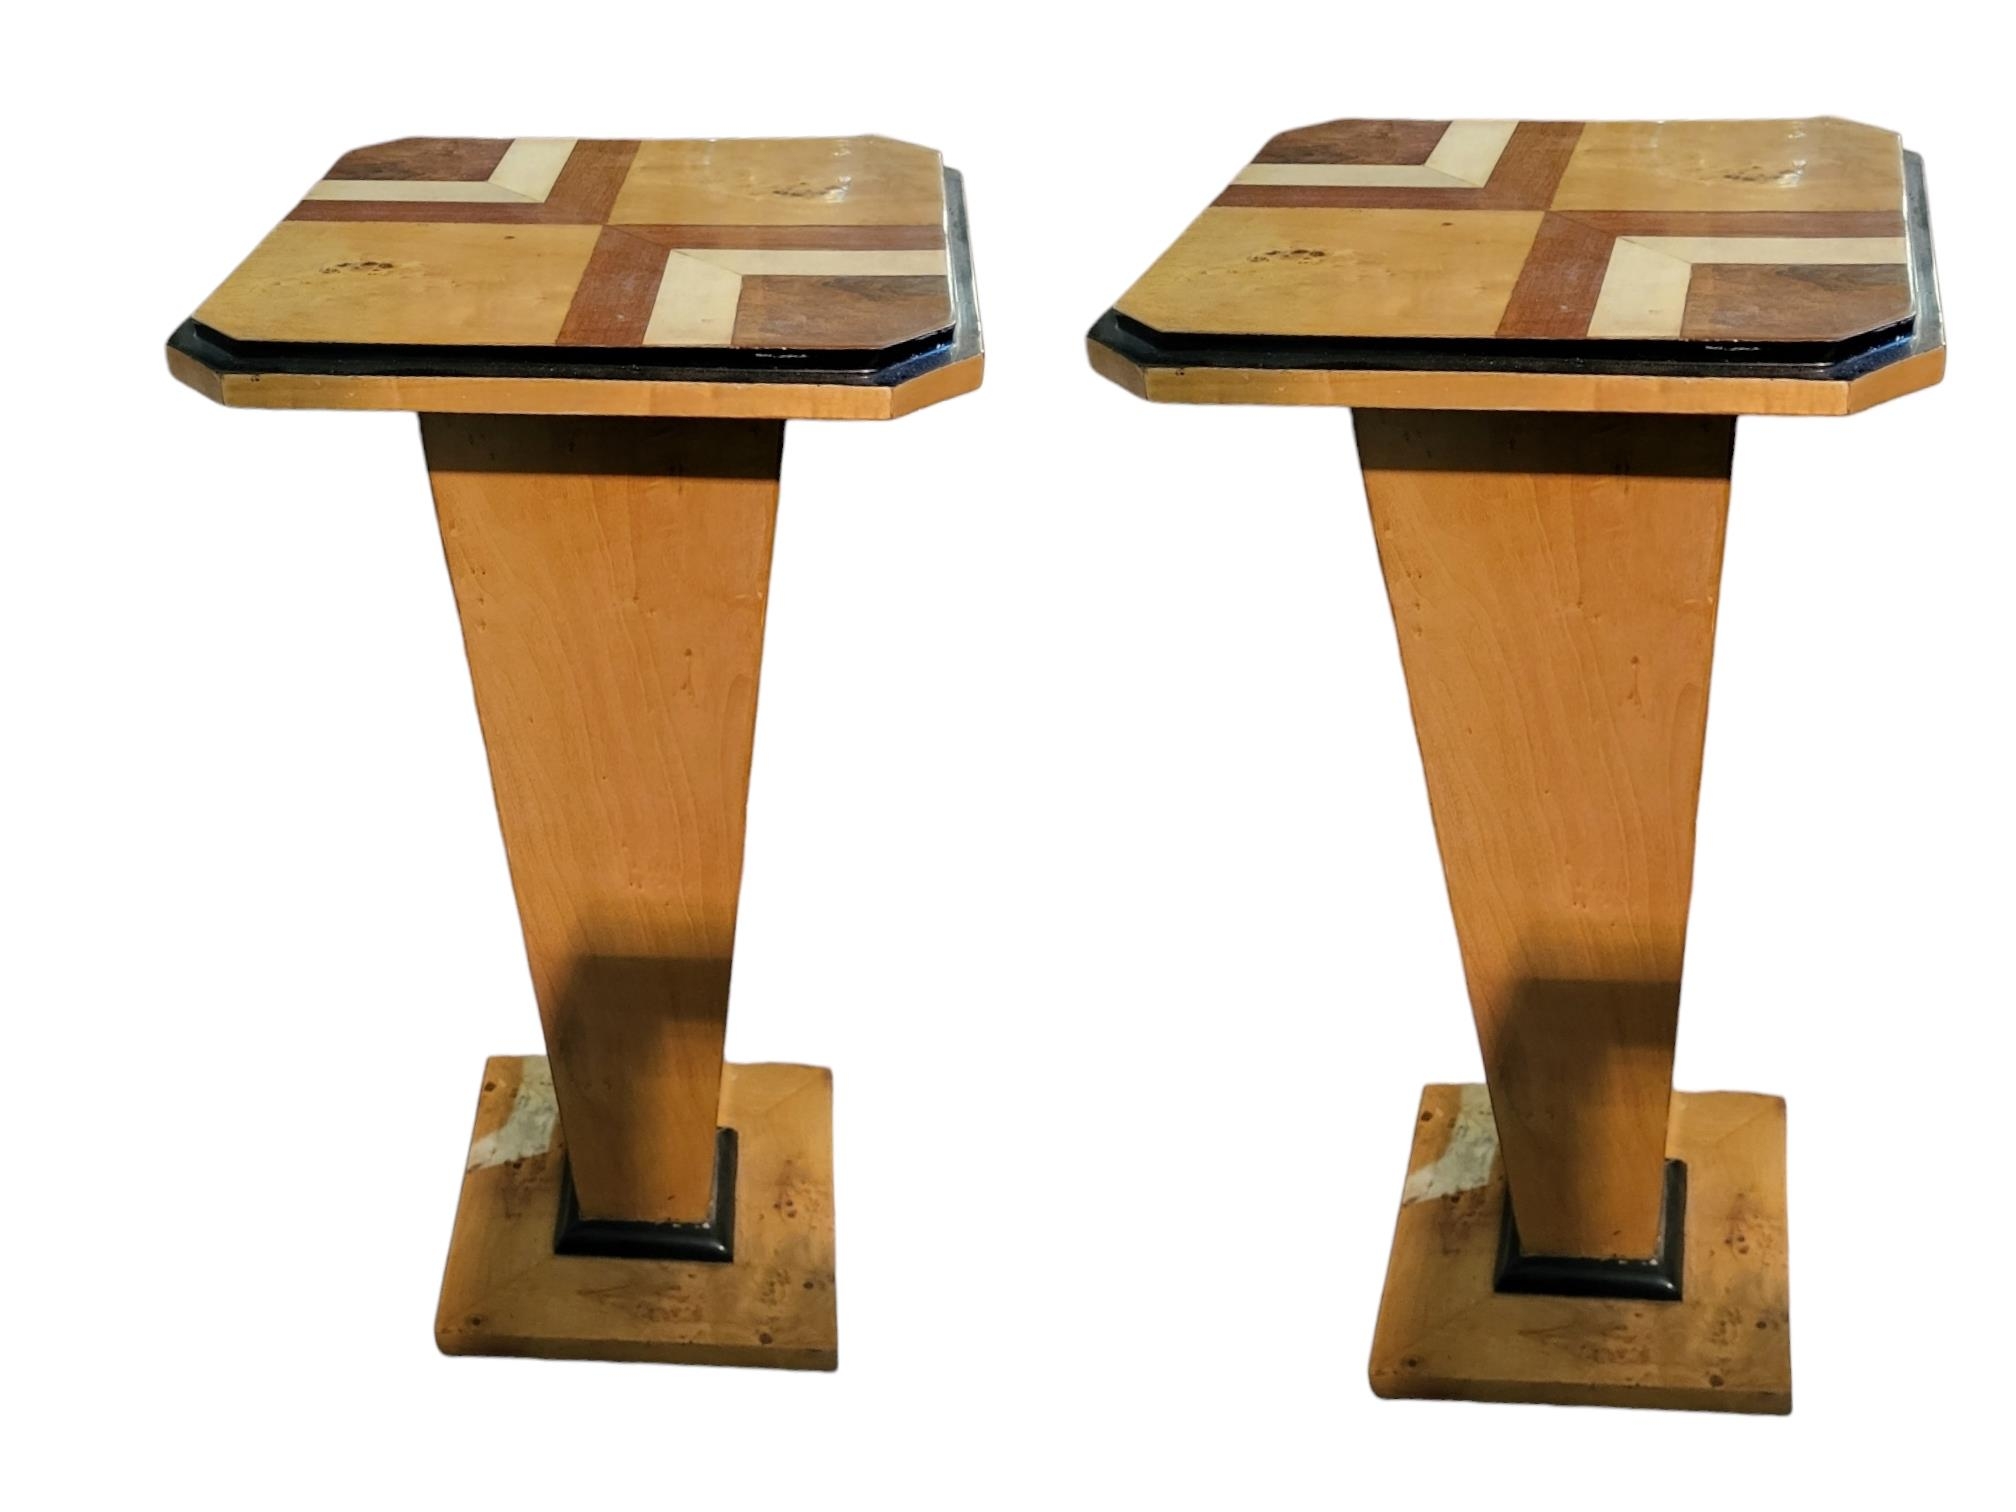 A PAIR OF CONTINENTAL ART DECO DESIGN MAPLE AND MIXED WOODS INLAID SIDE TABLES The square tops